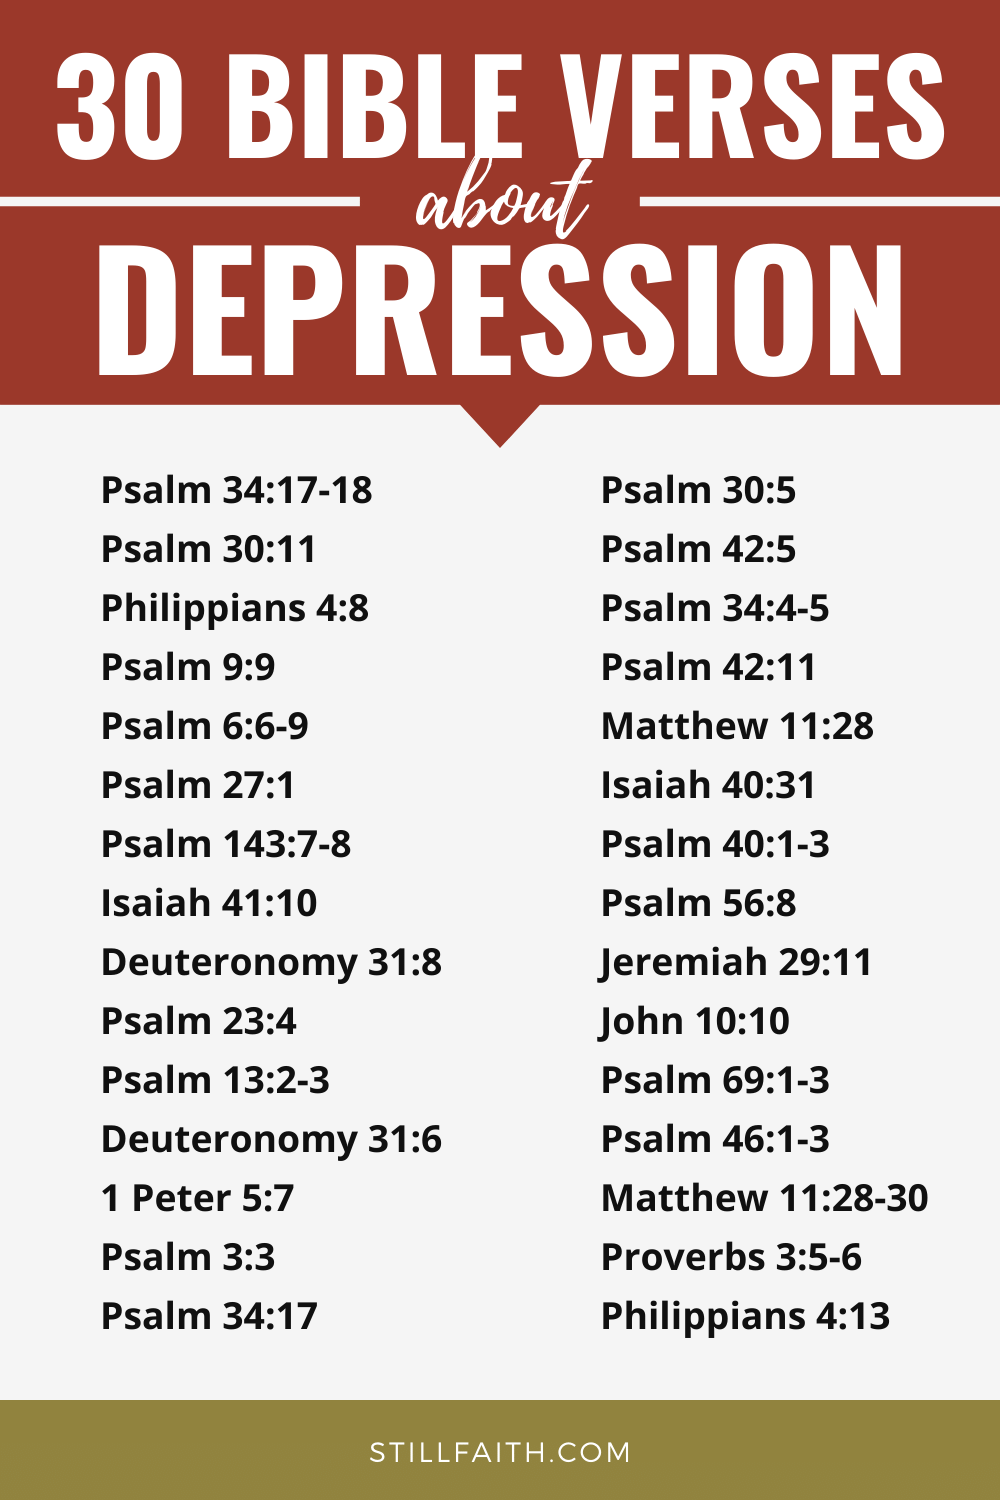 121 Bible Verses about Depression